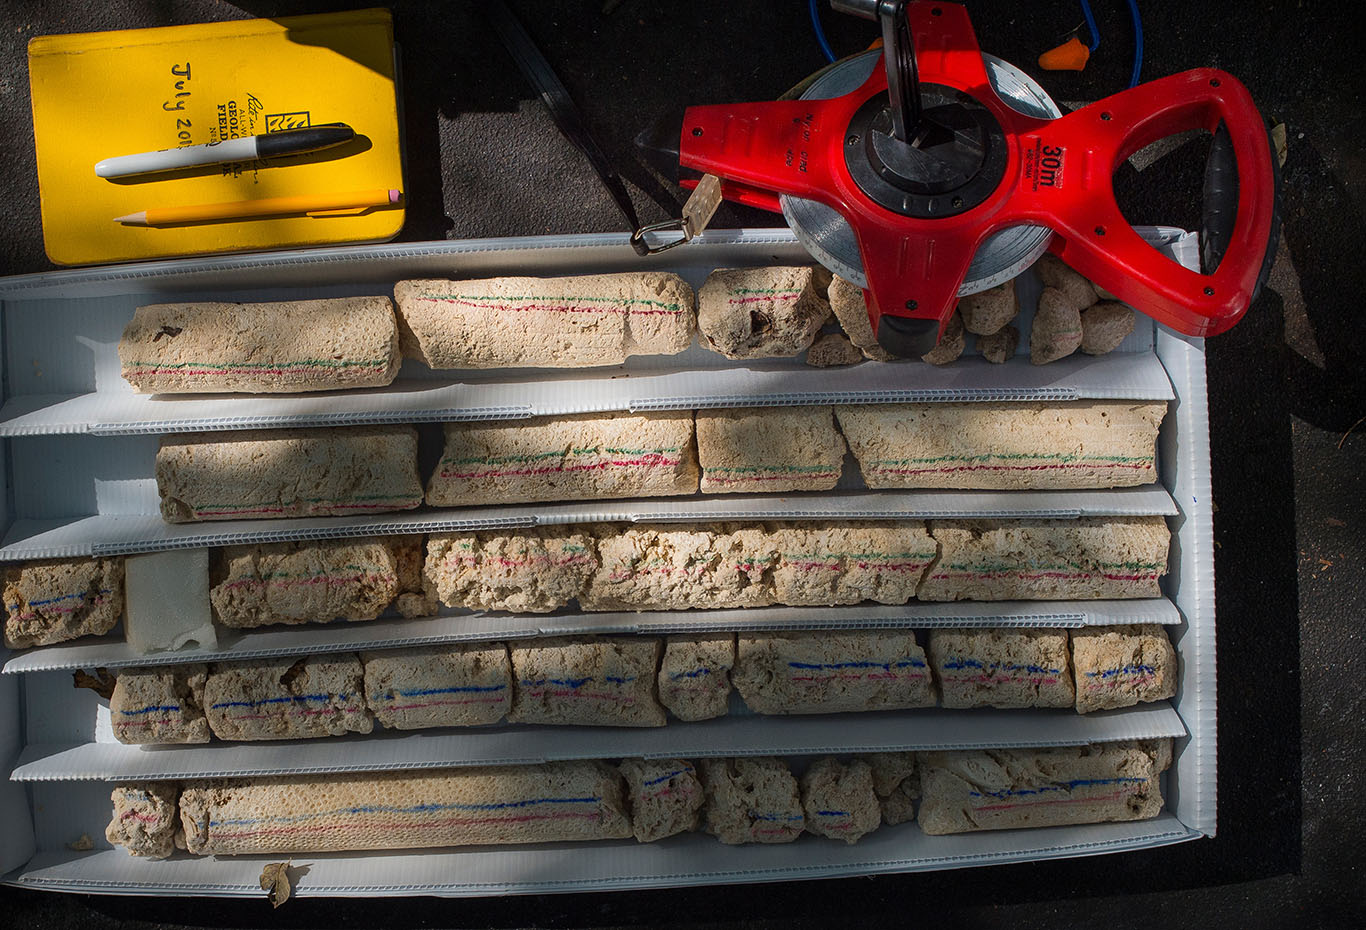 Tools of the trade: a water-resistant field notebook, a measuring tape, and drill core of the fossil reef that has been marked to denote orientation.